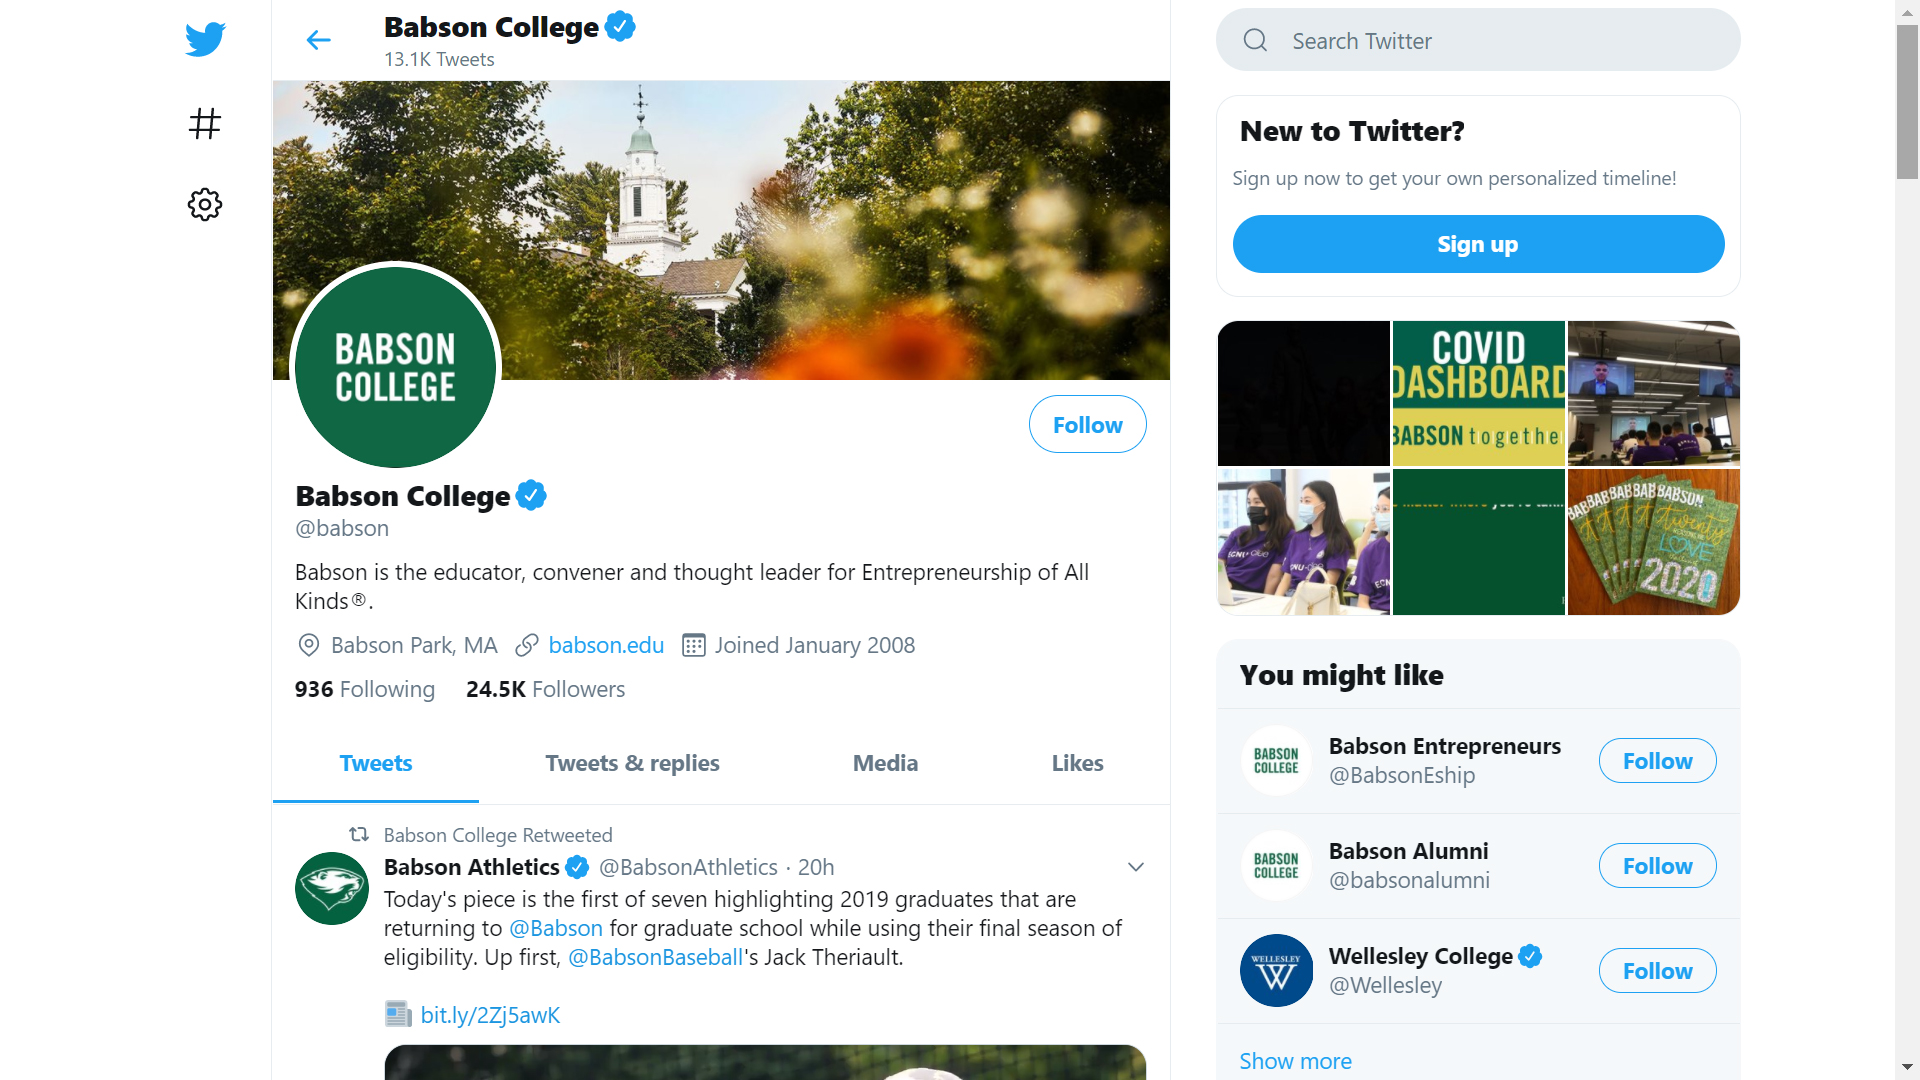 Babson College on Twitter